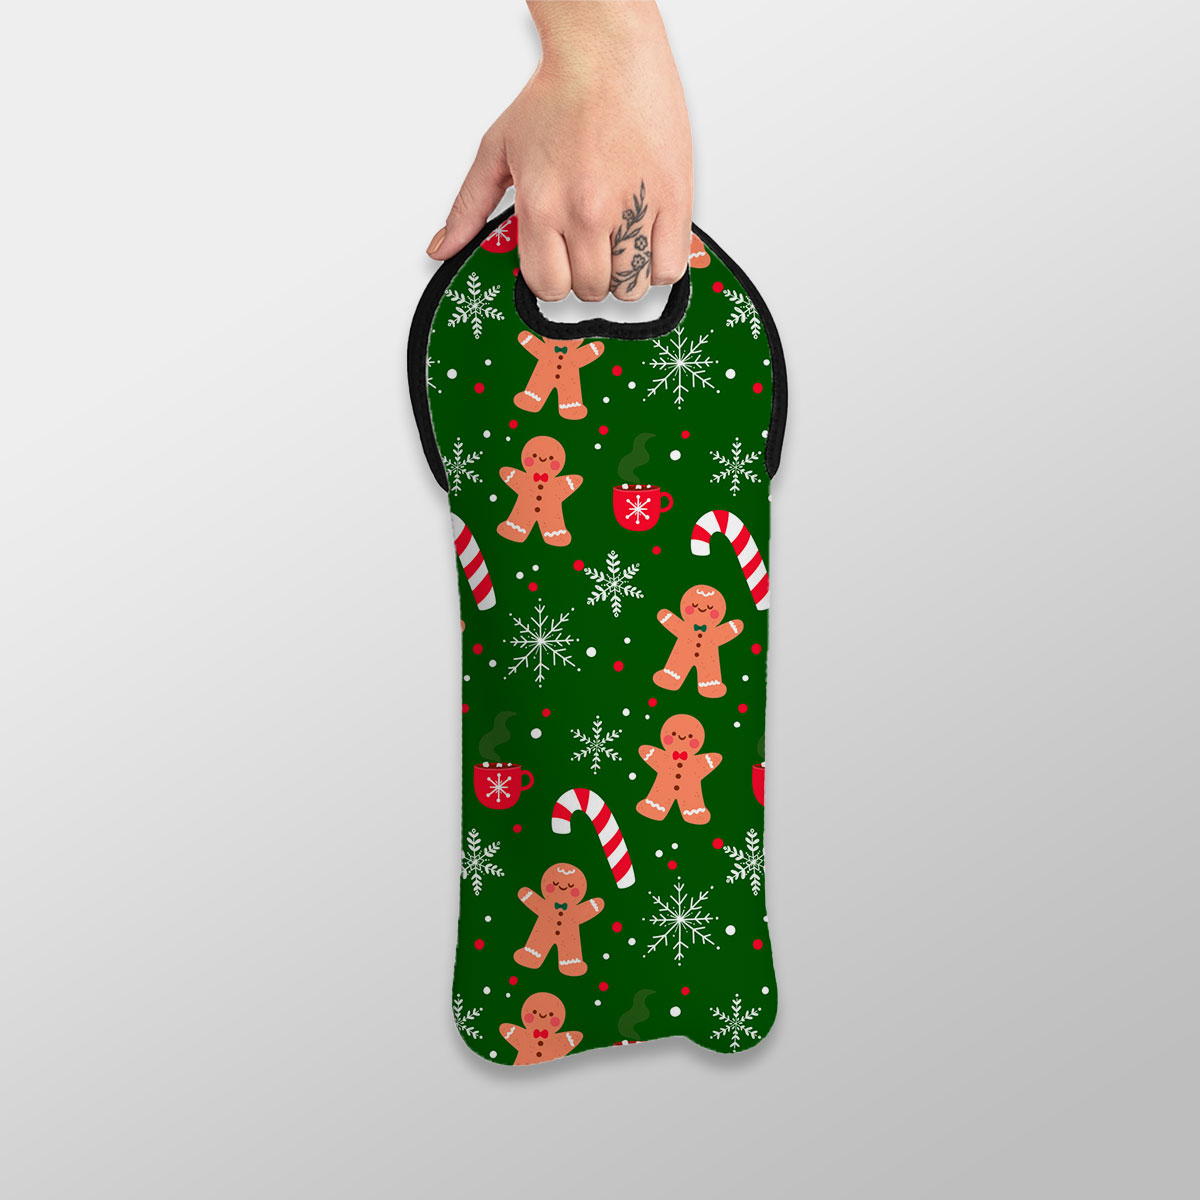 Red Green And White Gingerbread Man, Candy Cane With Snowflake Wine Tote Bag